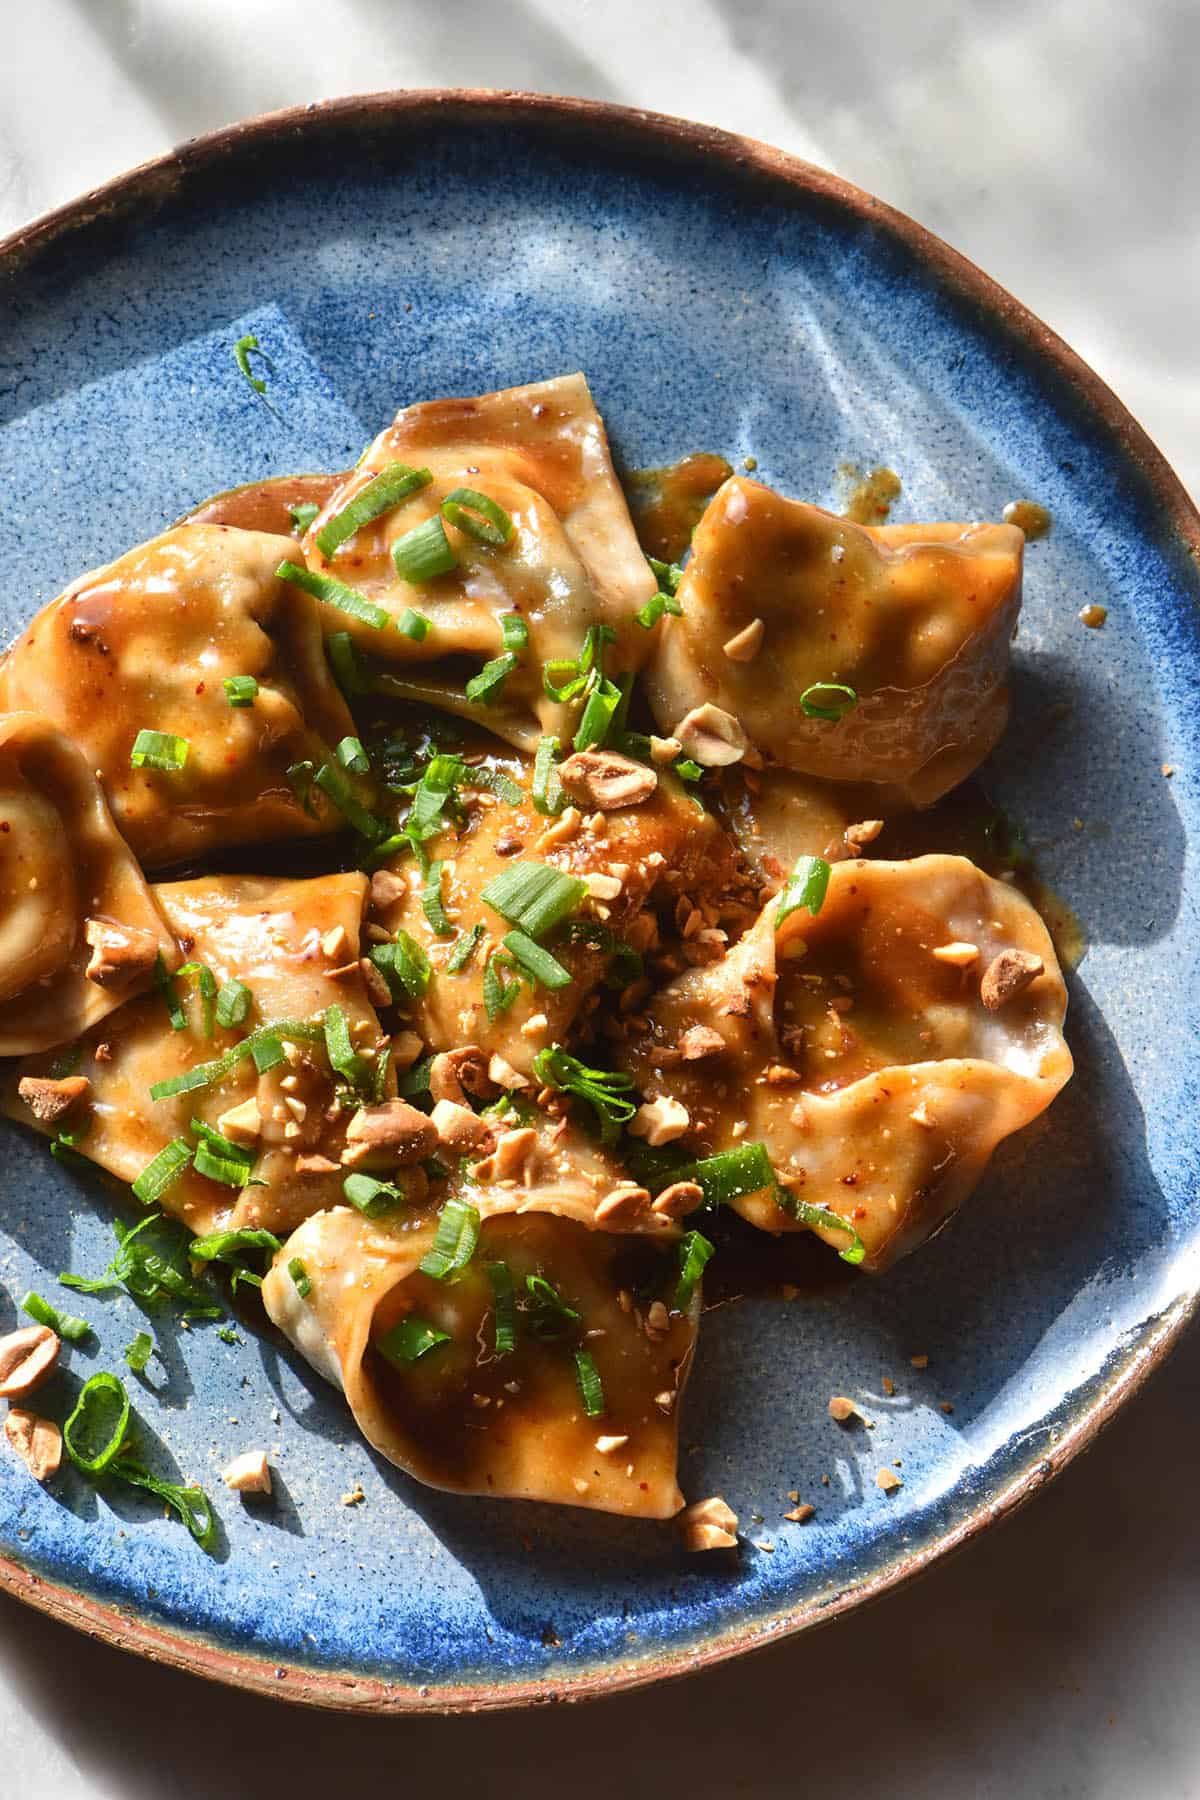 A brightly lit aerial image of gluten free wontons in a peanut butter sauce on a bright blue ceramic plate. The plate sits on a white marble table in contrasting sunlight.